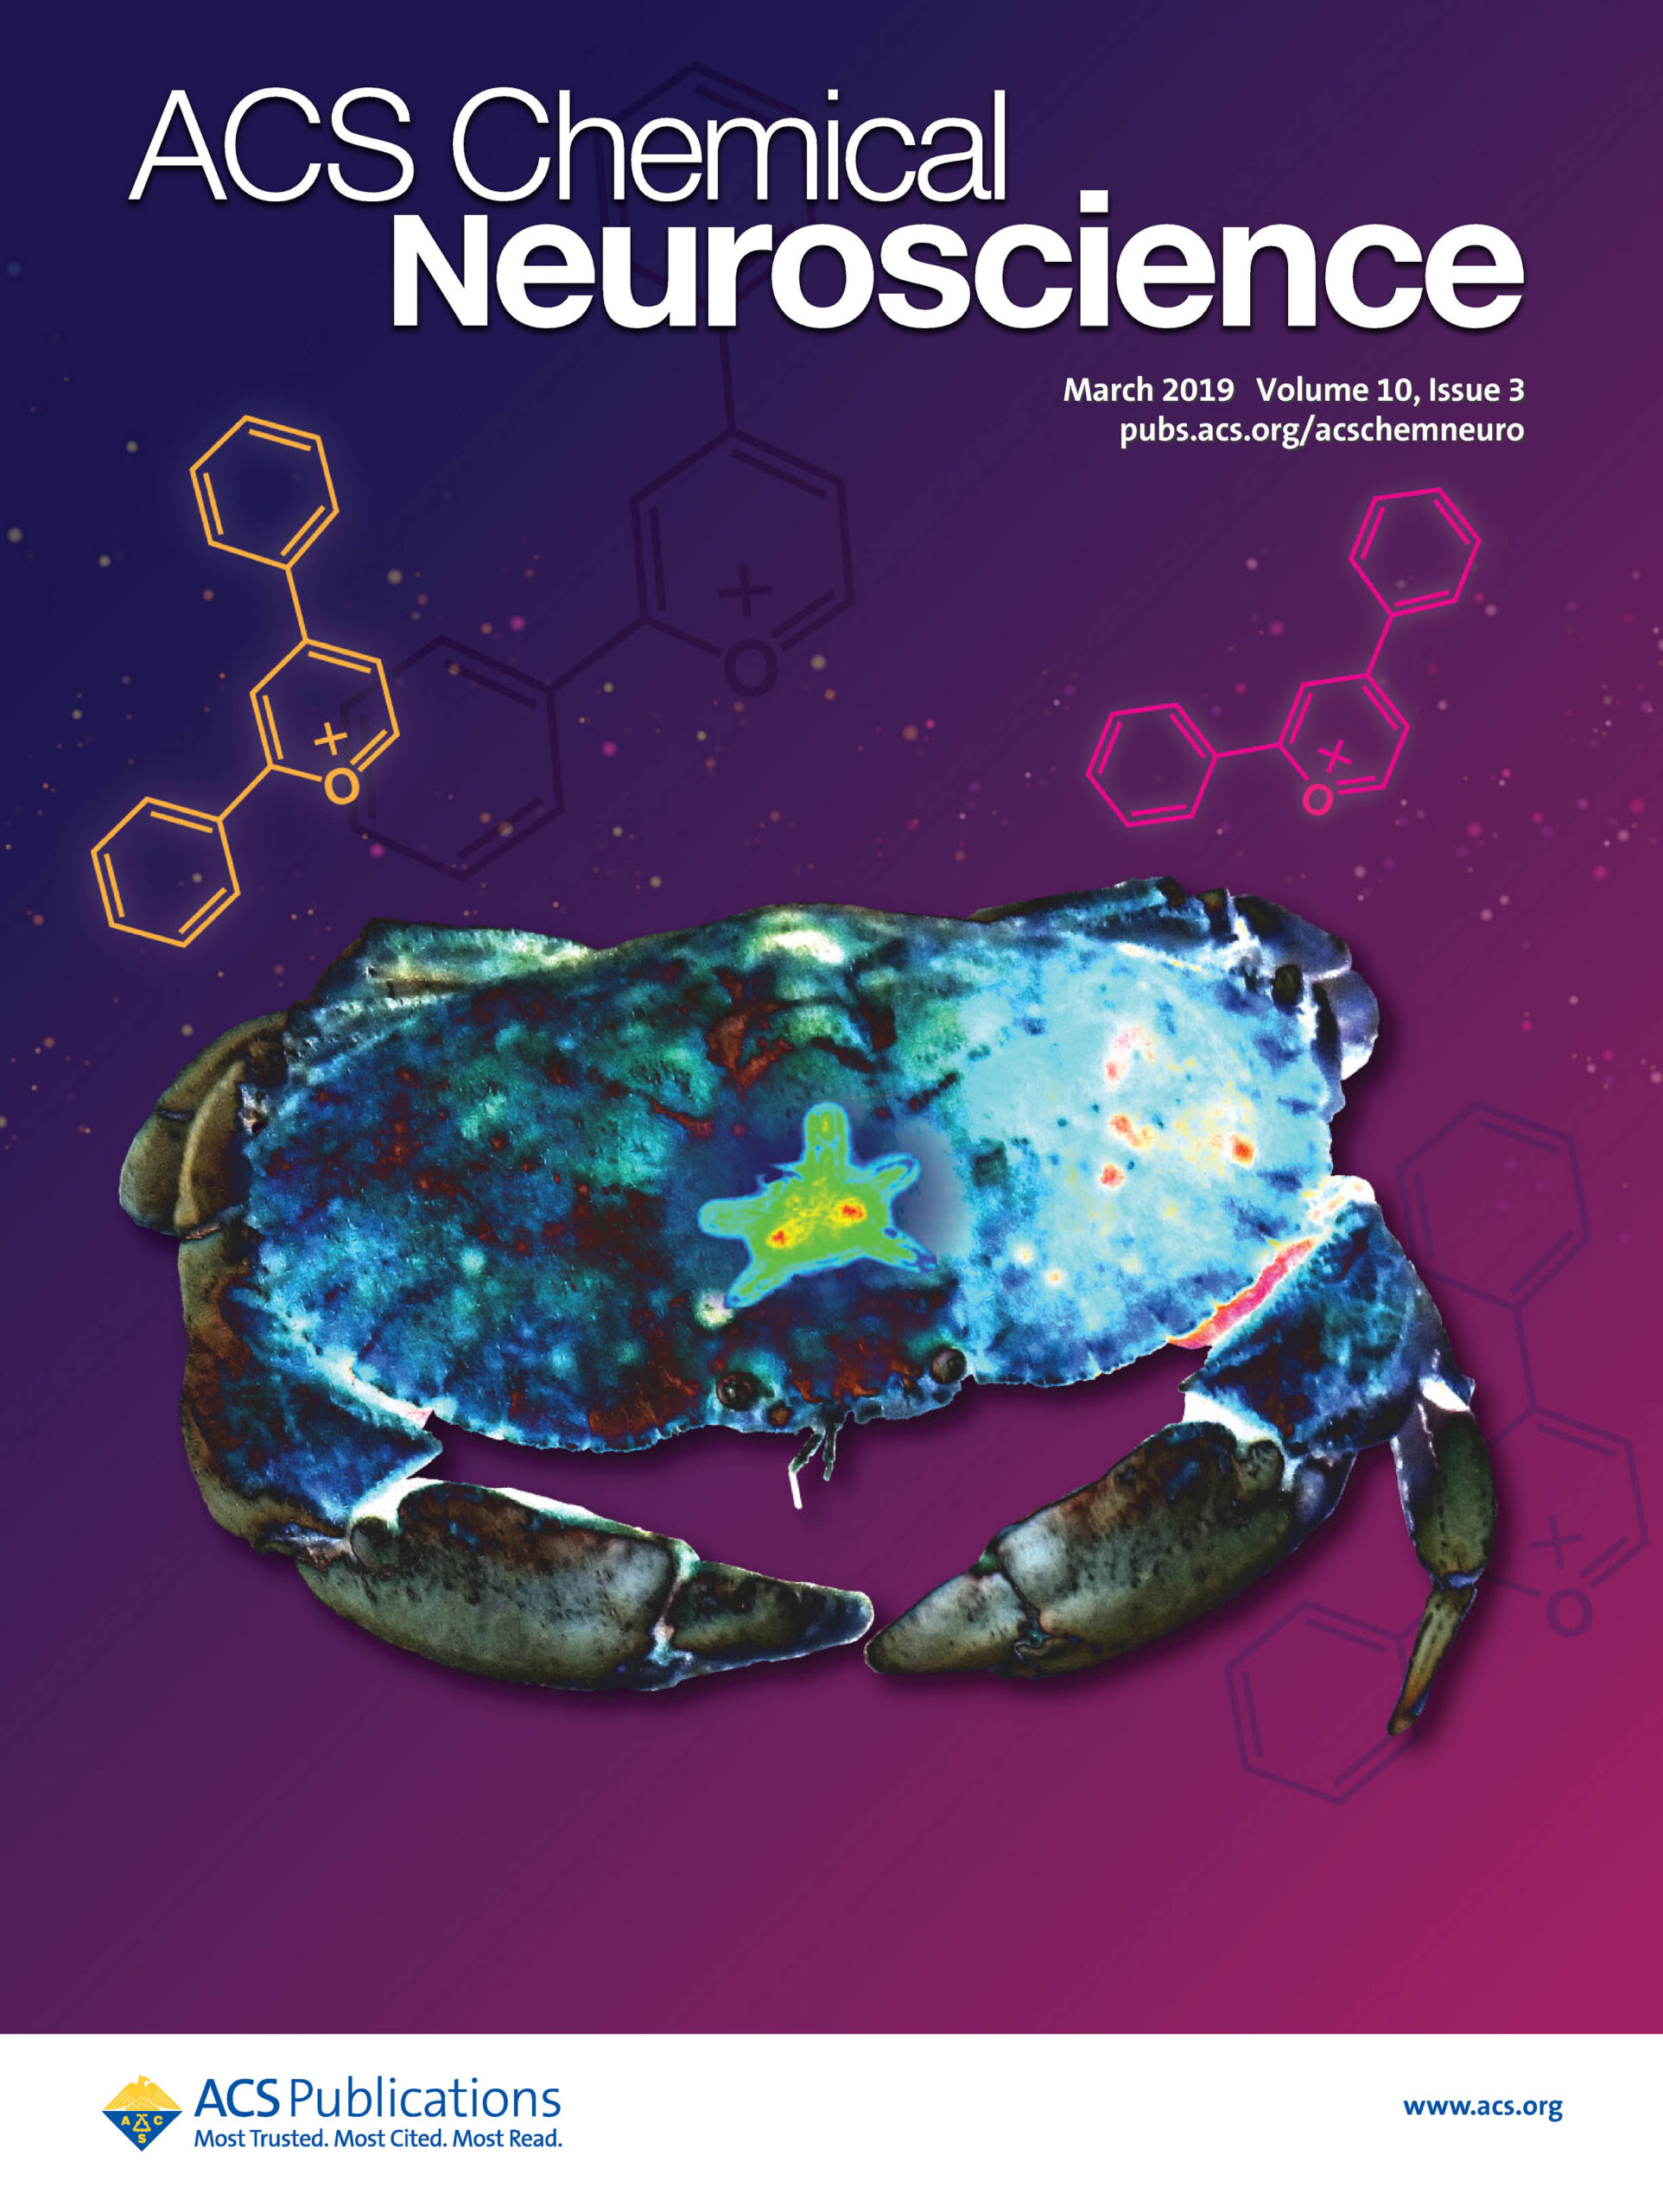 ACS Chemical Neuroscience journal Volume 10 Issue 3 cover